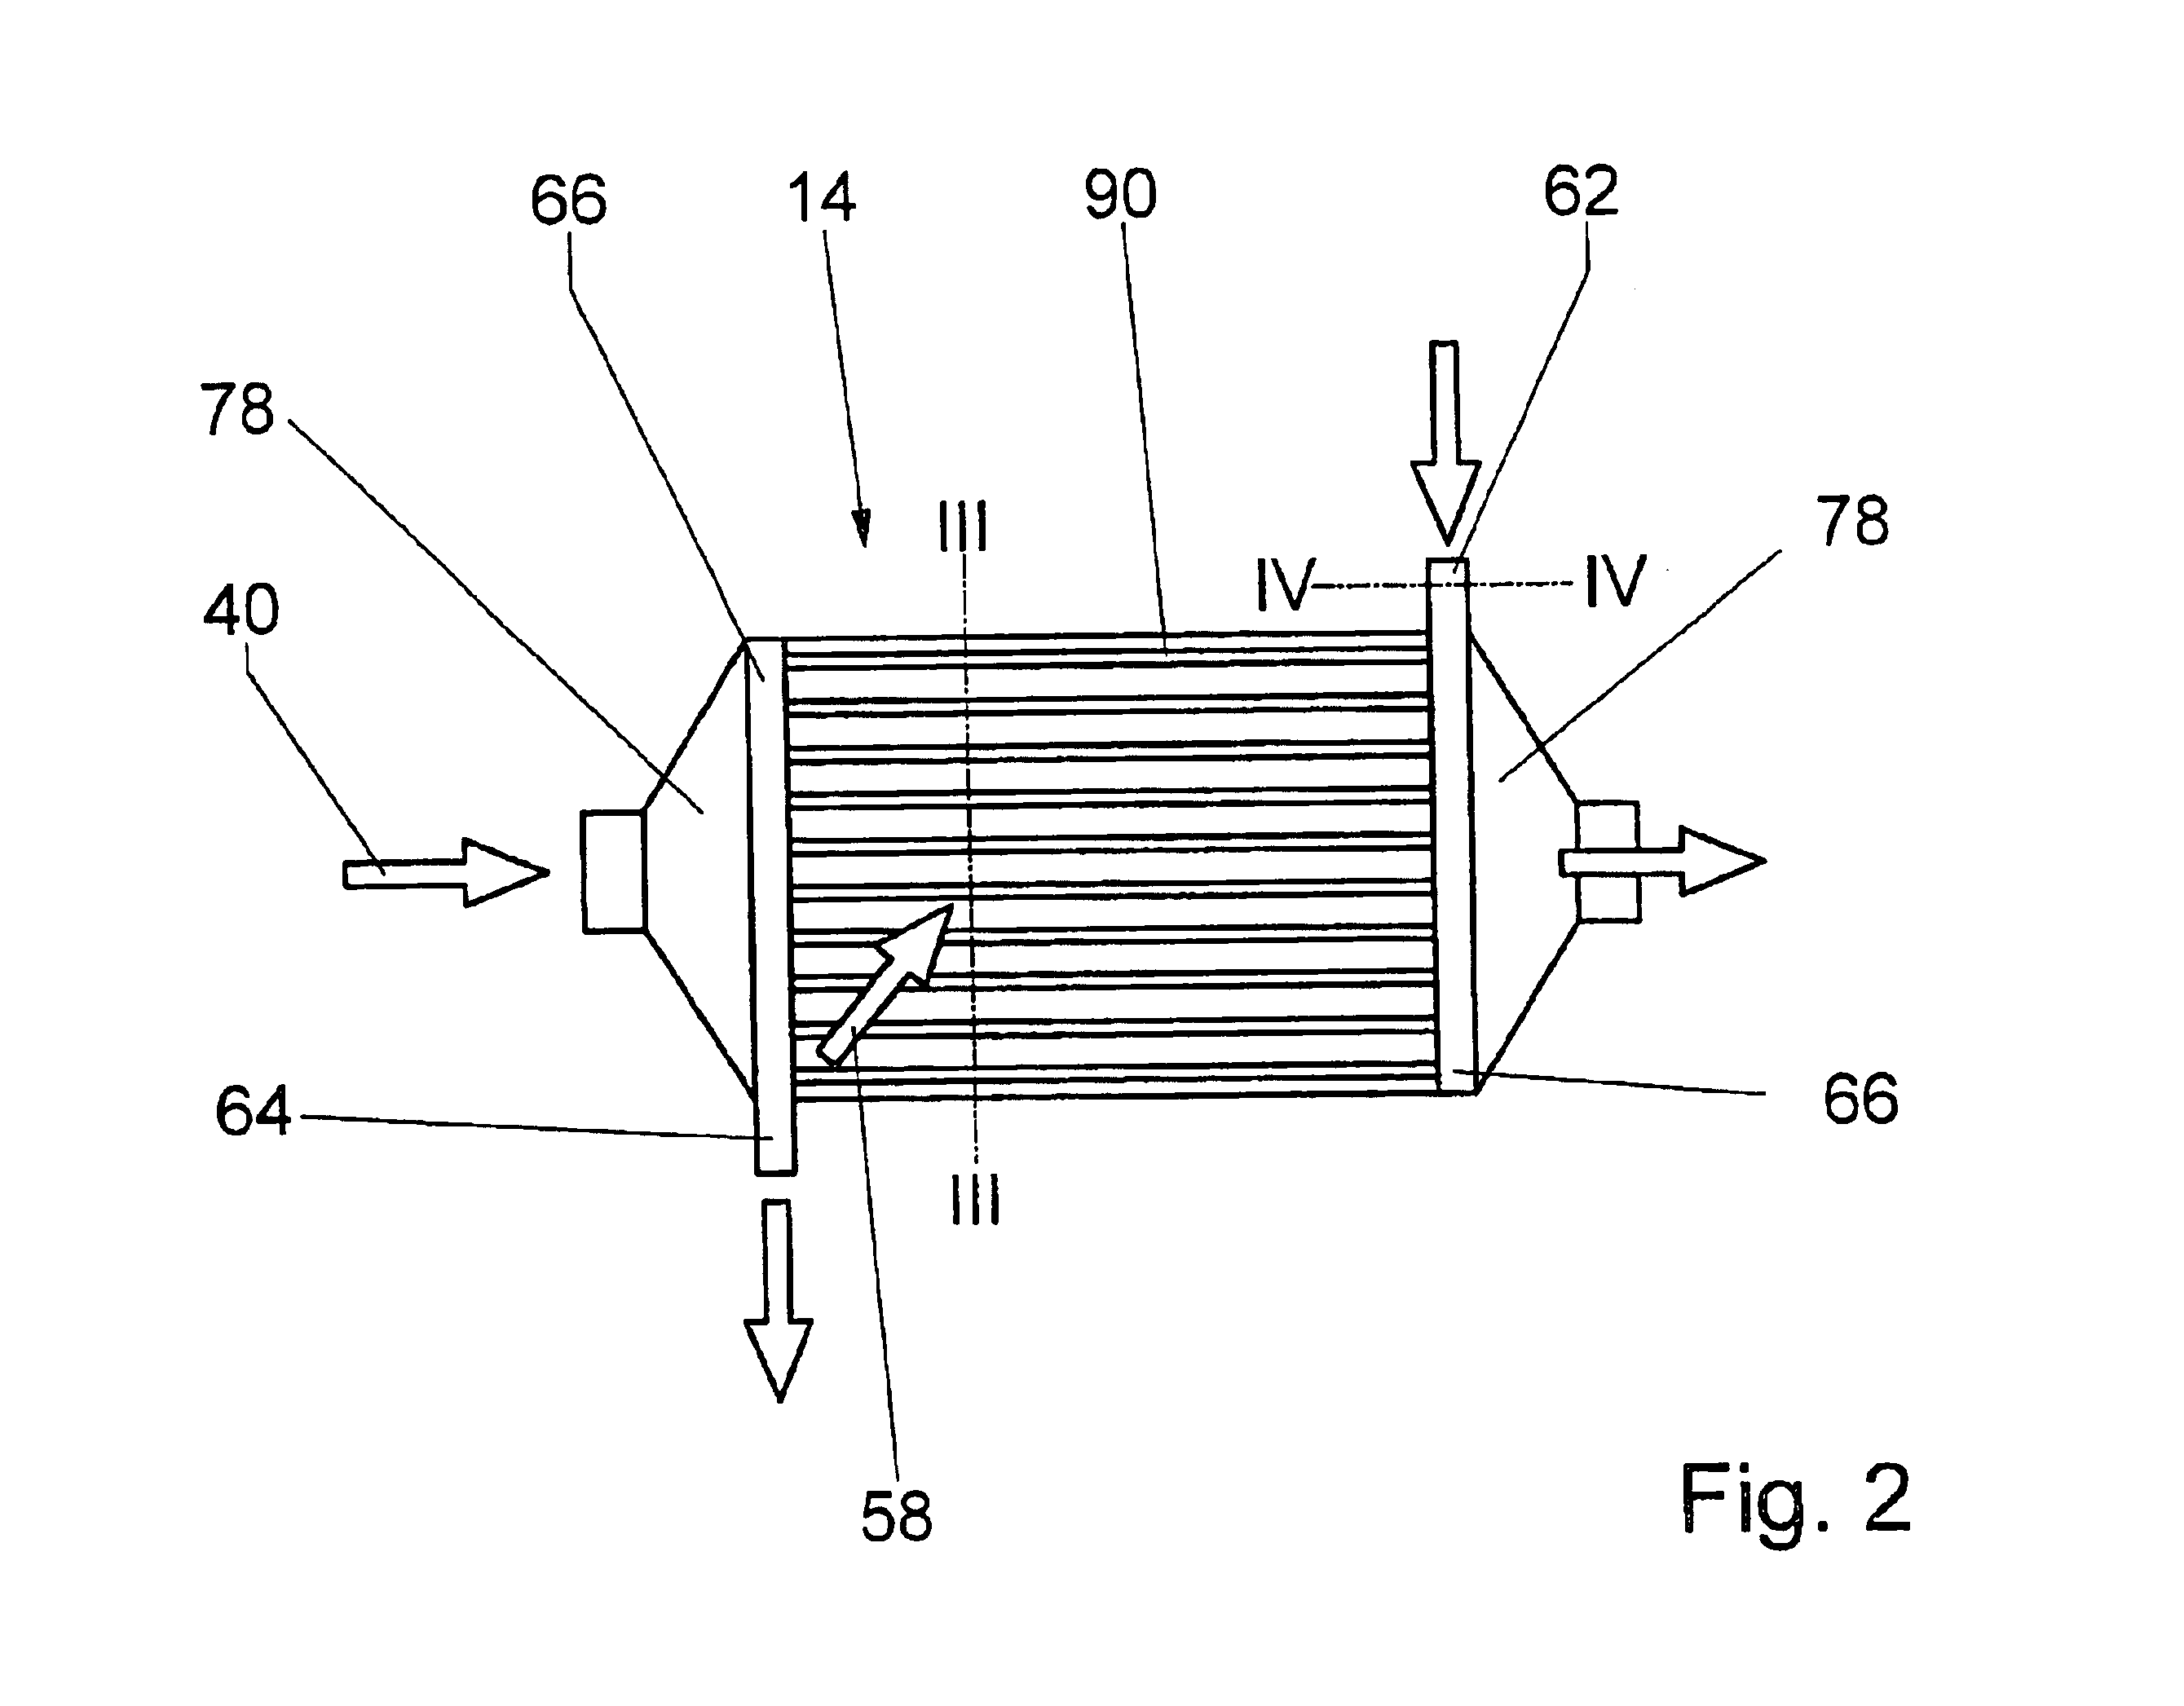 Air-conditioning unit with additional heat transfer unit in the refrigerant circuit